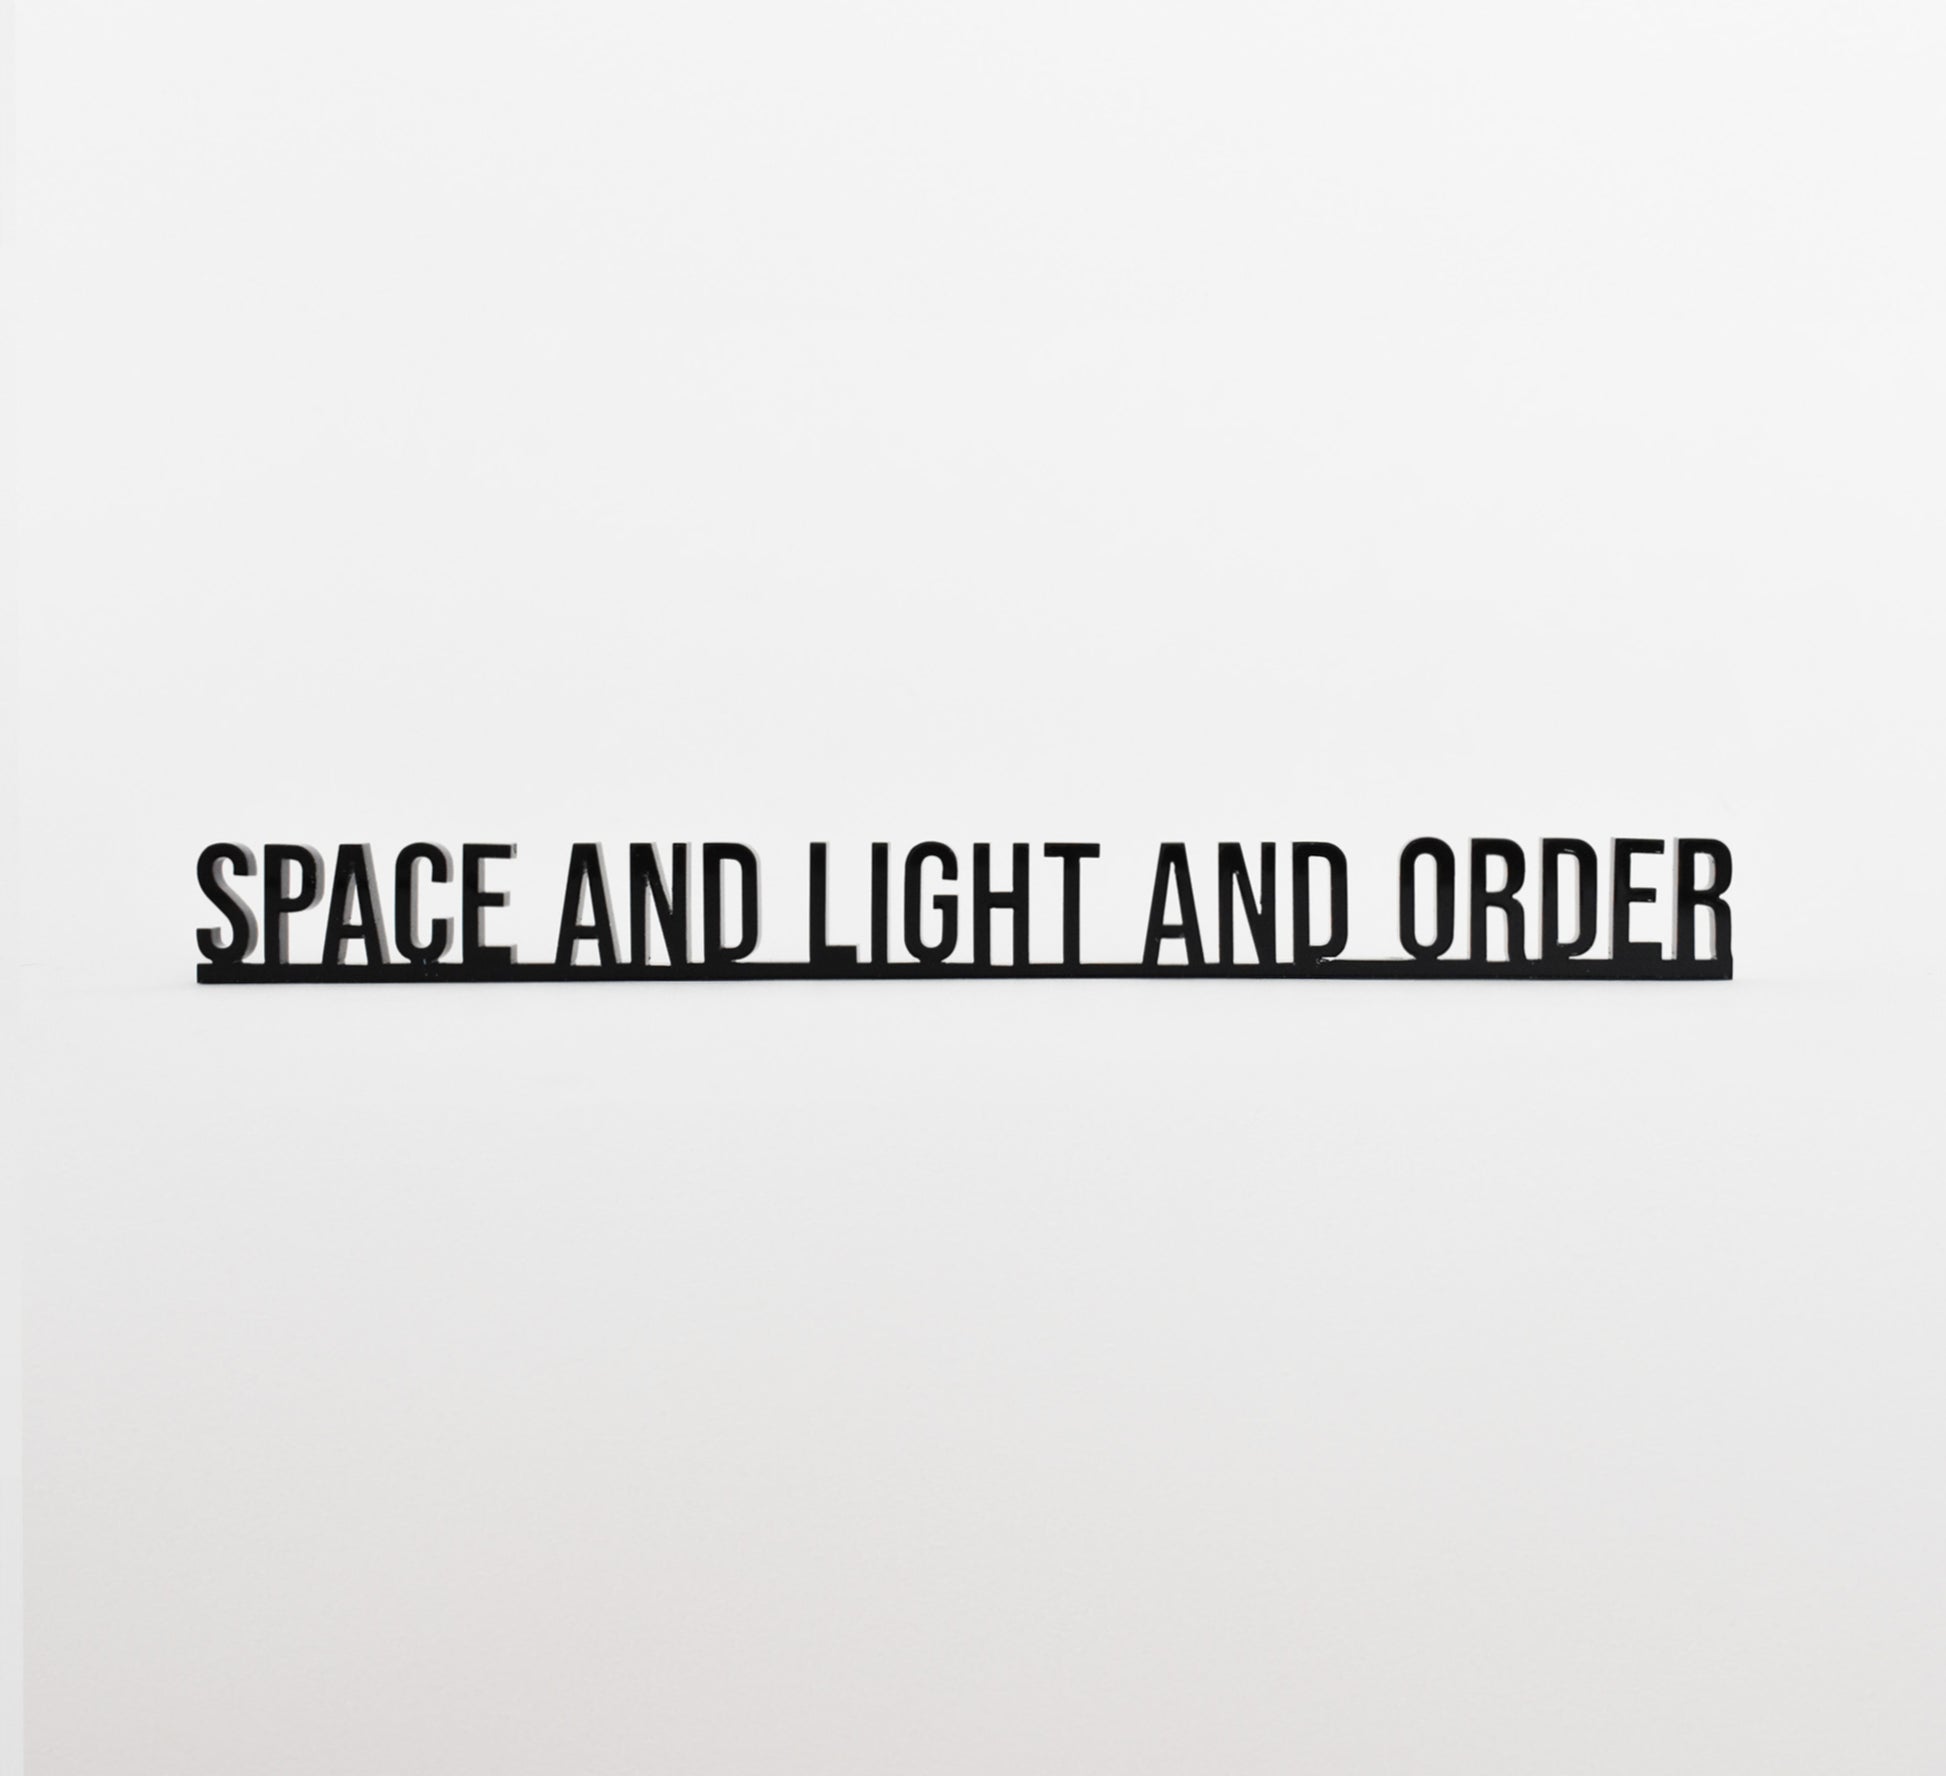 Architecture Quotes - Space and Light and Order  beamalevich architecture gift design gift art gift